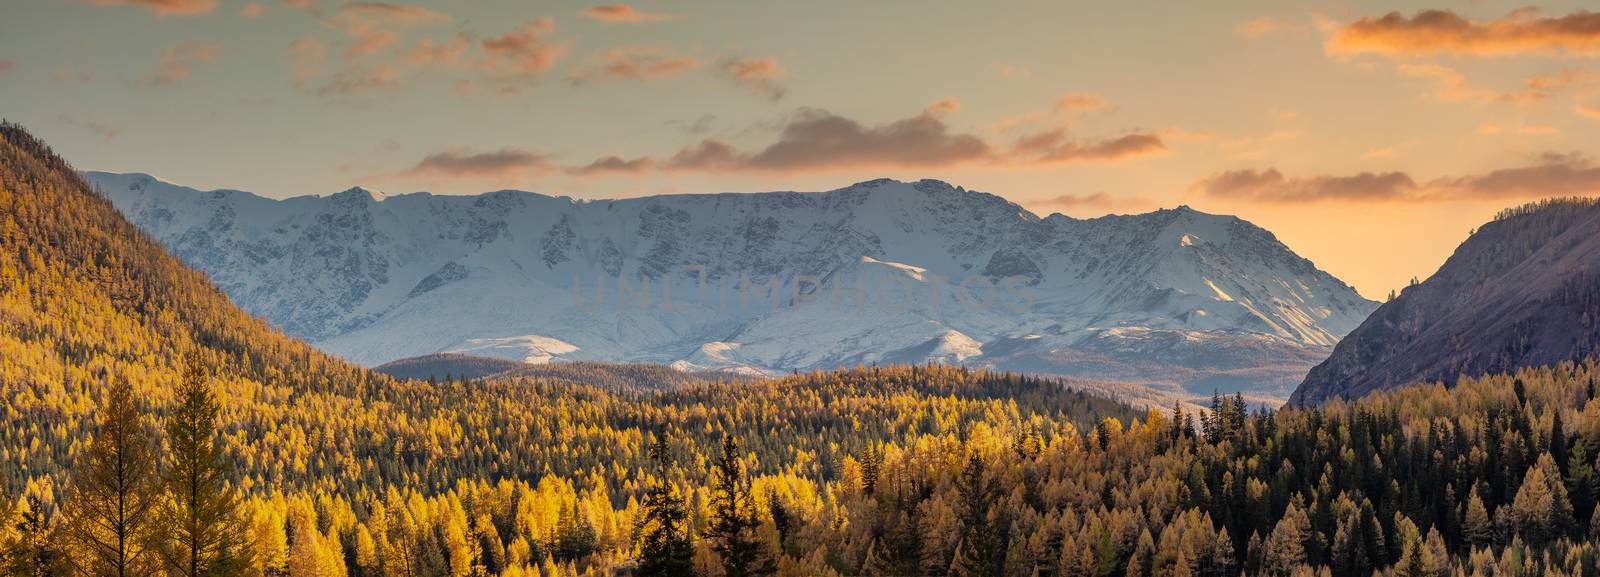 Scenic panoramic aerial view of snowy mountain peaks of North Chuyskiy ridge. Golden trees in the foreground. Beautiful cloudy sunset sky as a backdrop. Golden hour. Altai mountains, Siberia, Russia by DamantisZ